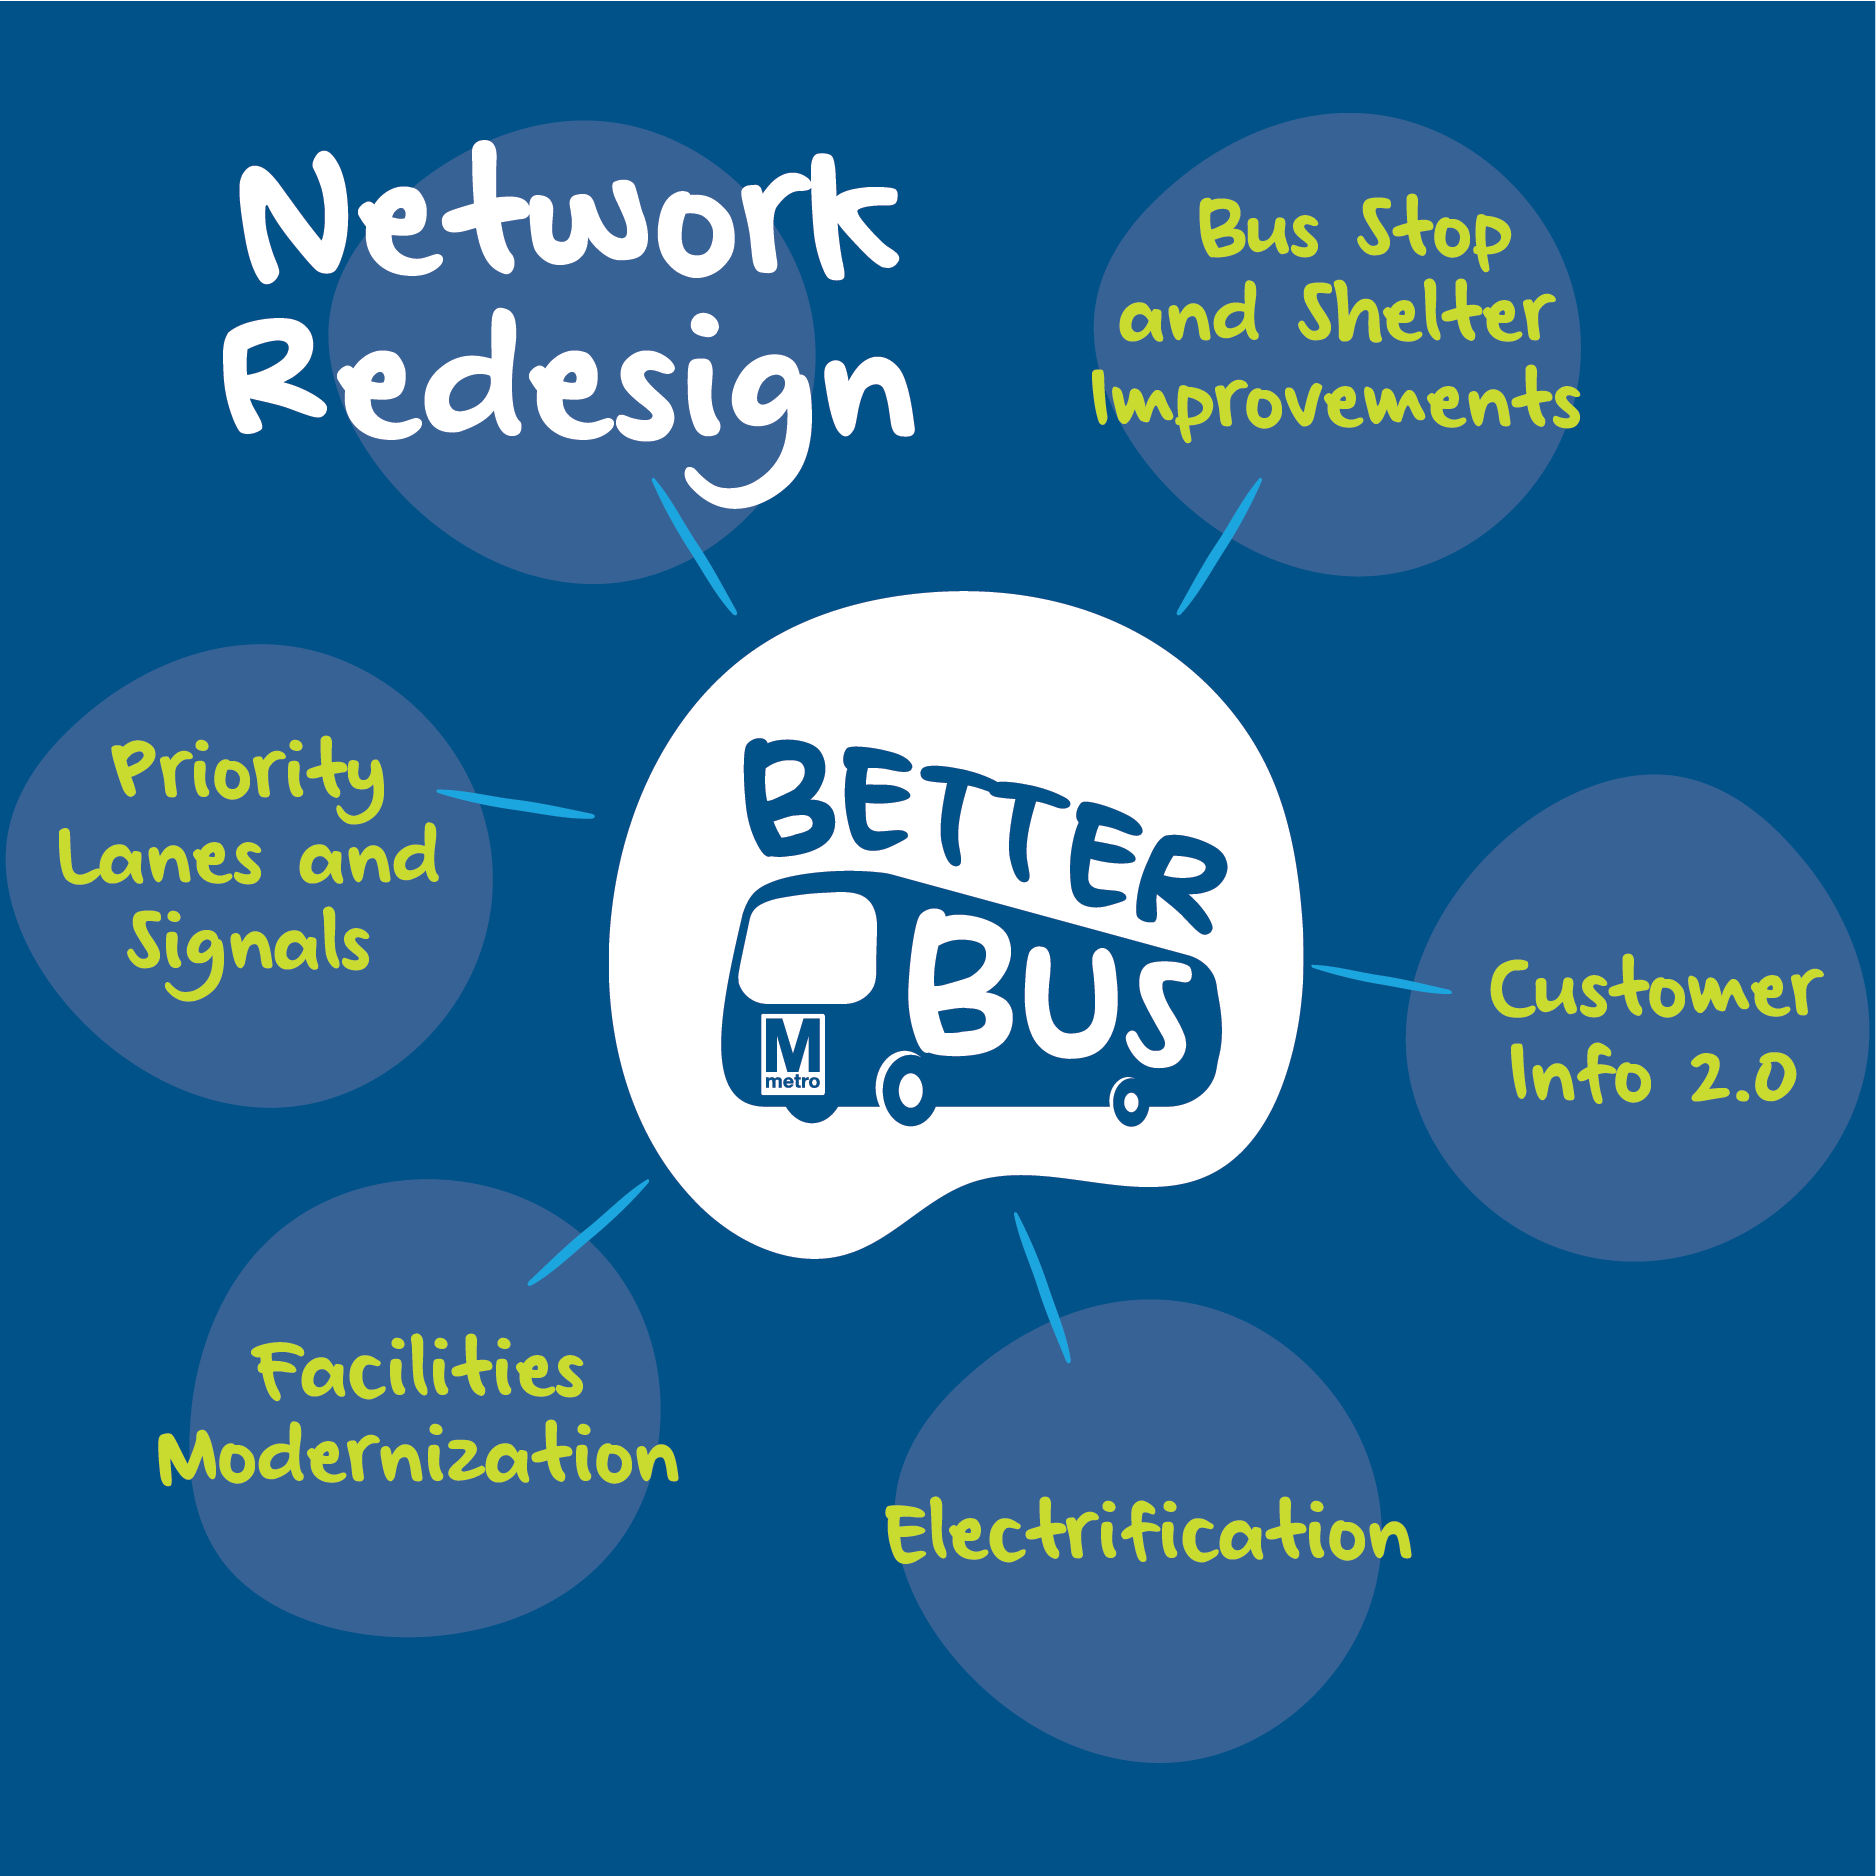 The Better Bus includes a network redesign, Bus Stop and Shelter Improvements, Customer Info 2.0, electrification, facilities modernization, and priority lanes and signals.